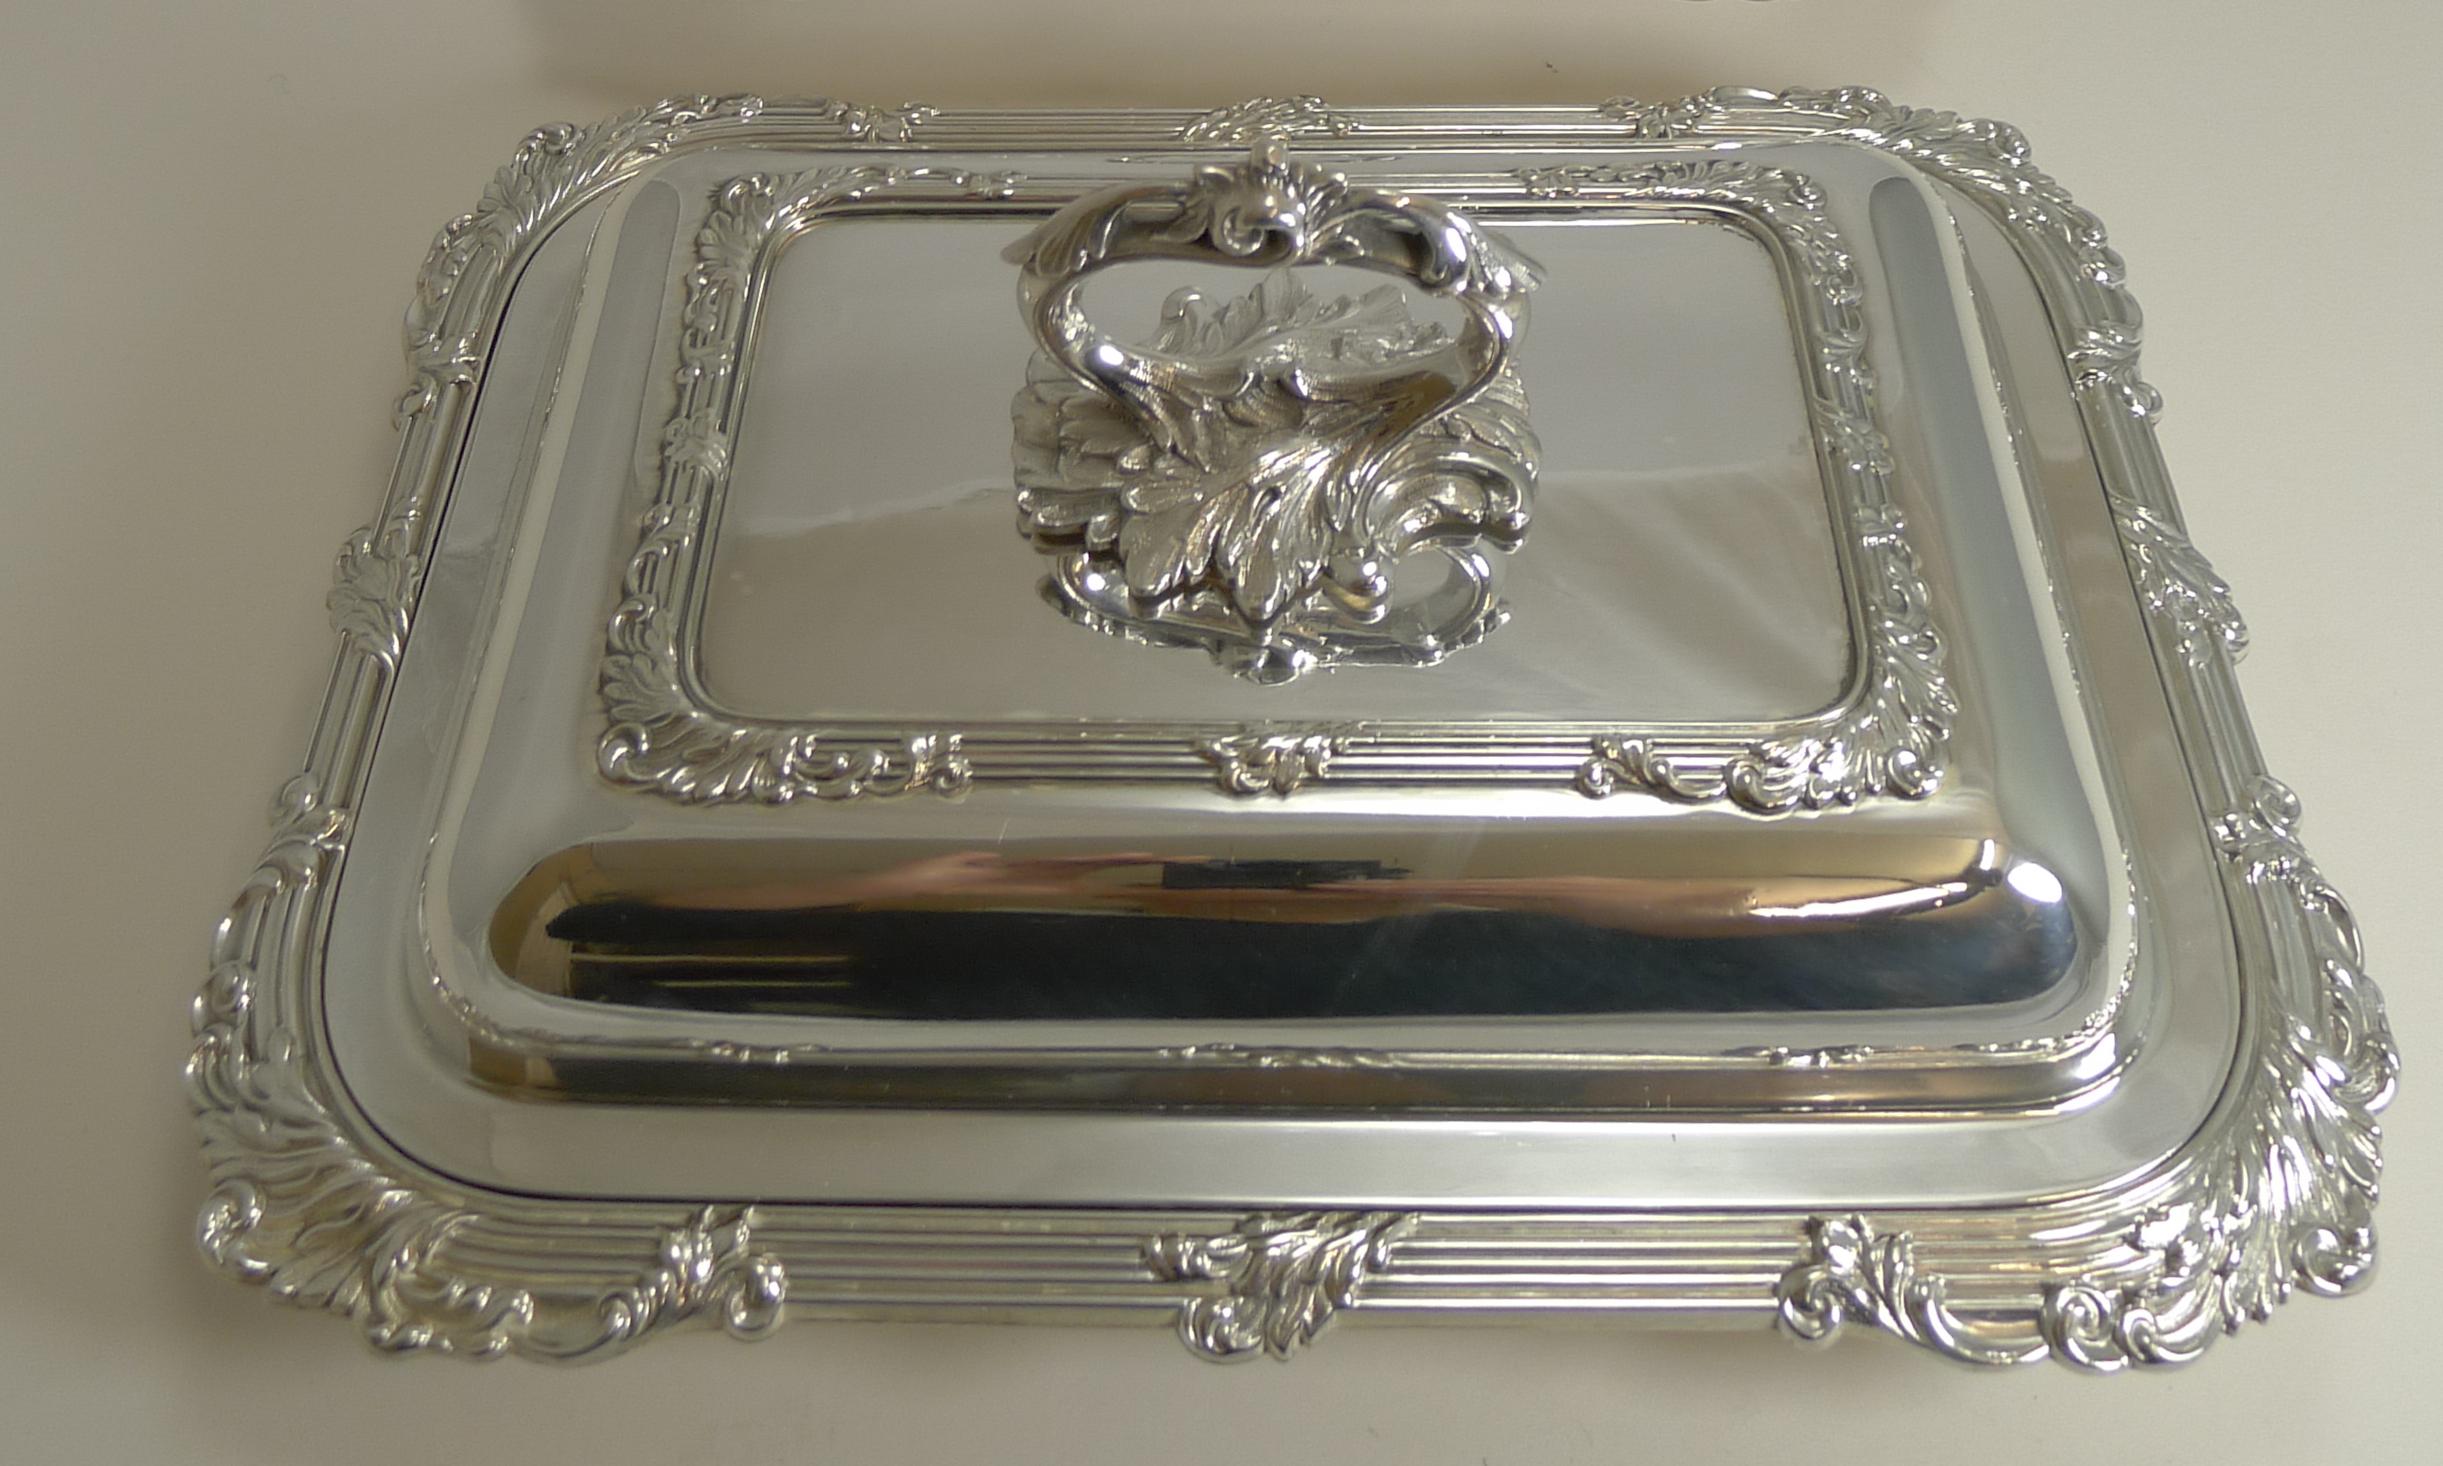 Pair of Antique English Silver Plated Entree Dishes by James Dixon & Sons 1